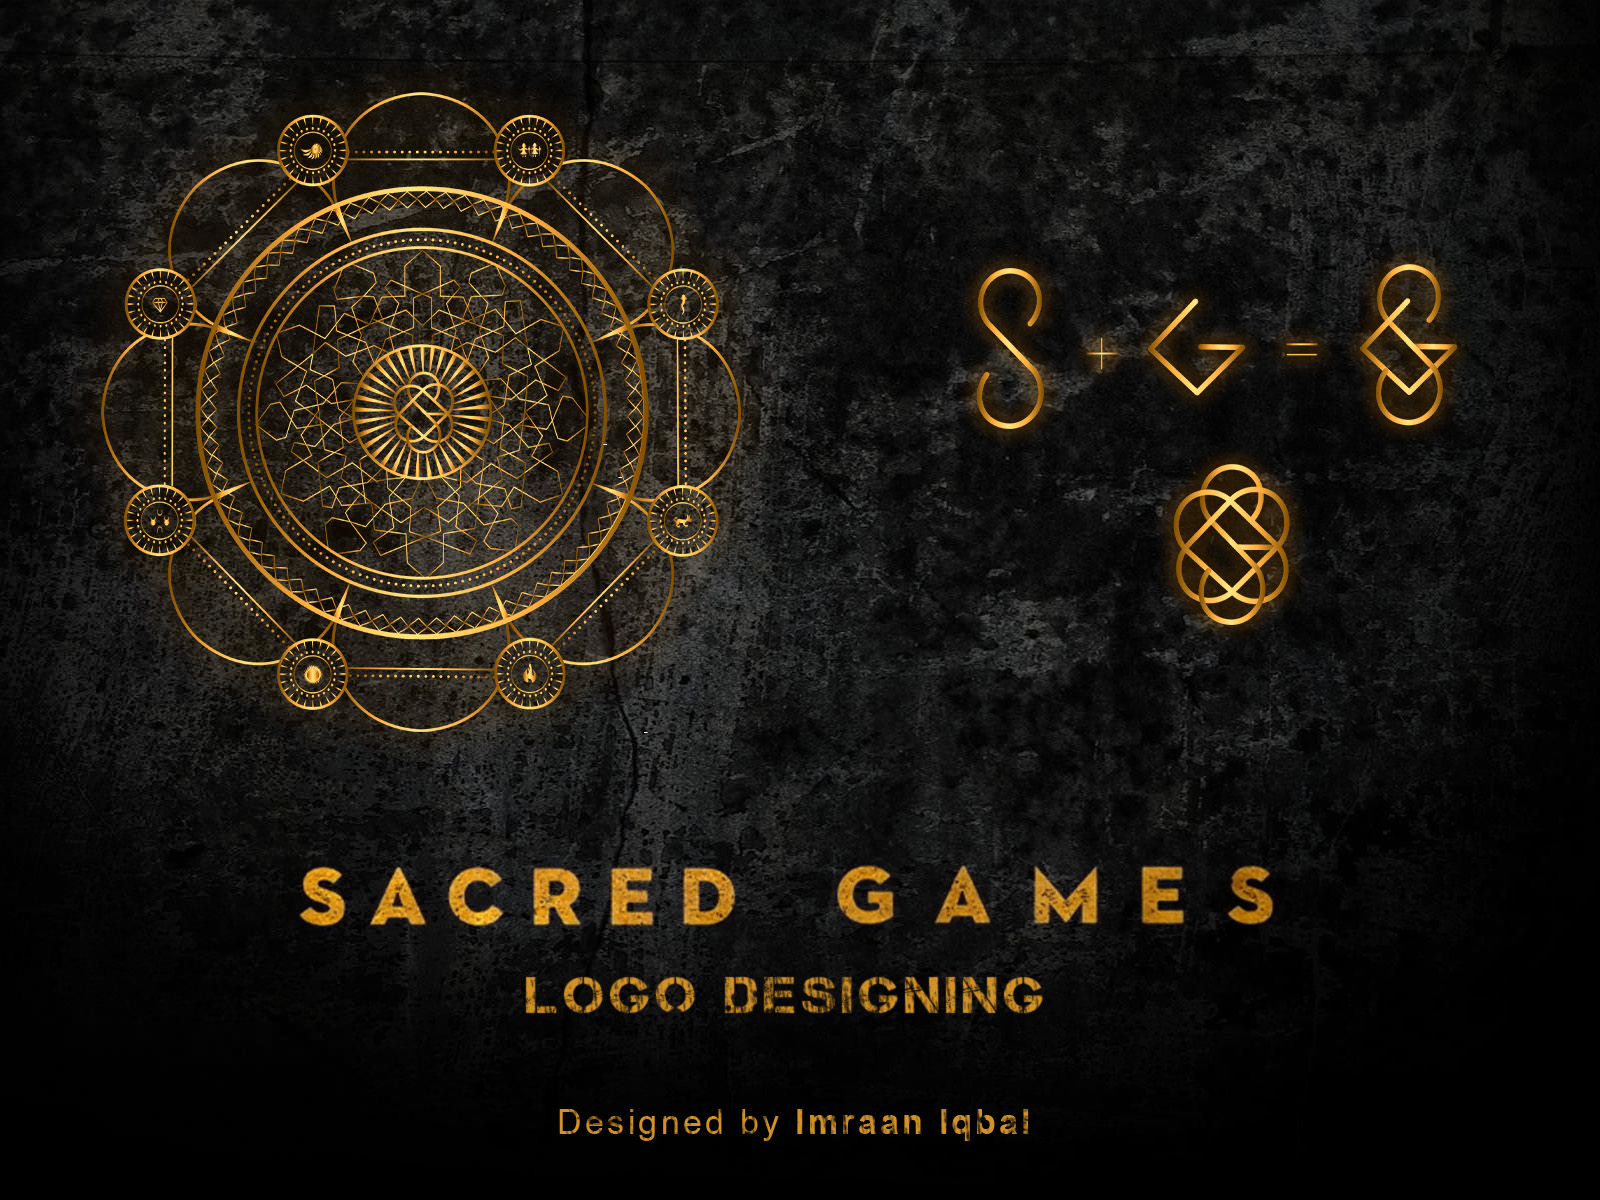 Sacred Games 2: Story and Significance of Logos and Mandalas - YouTube